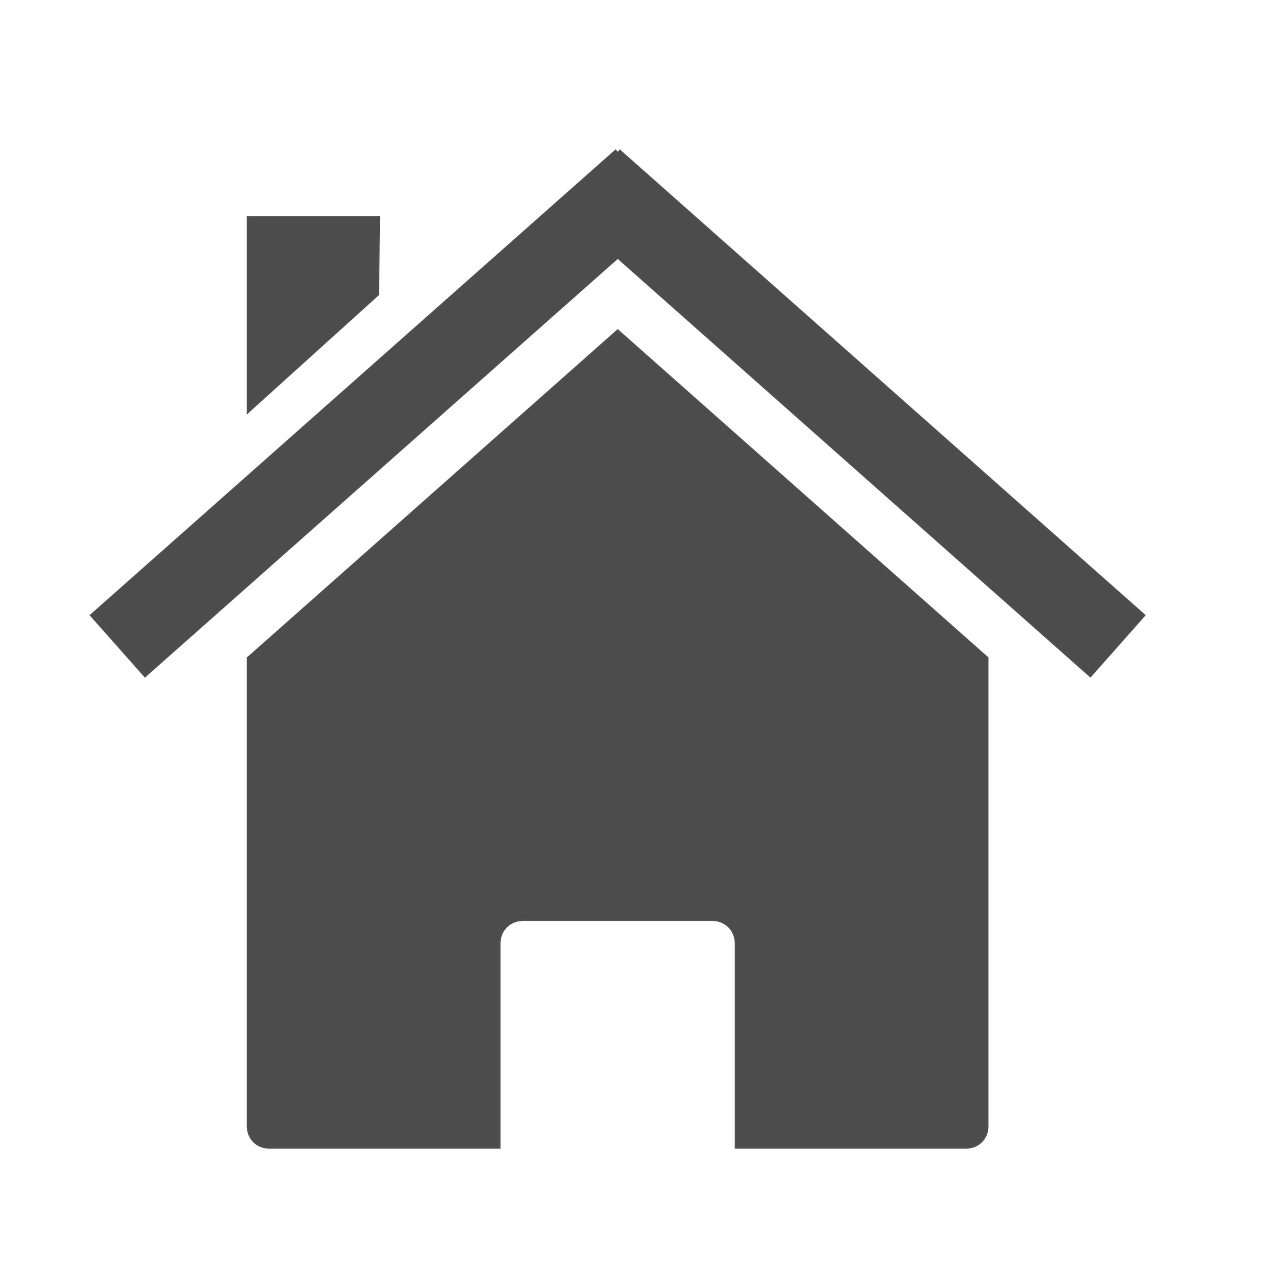 house-icon-home-308936